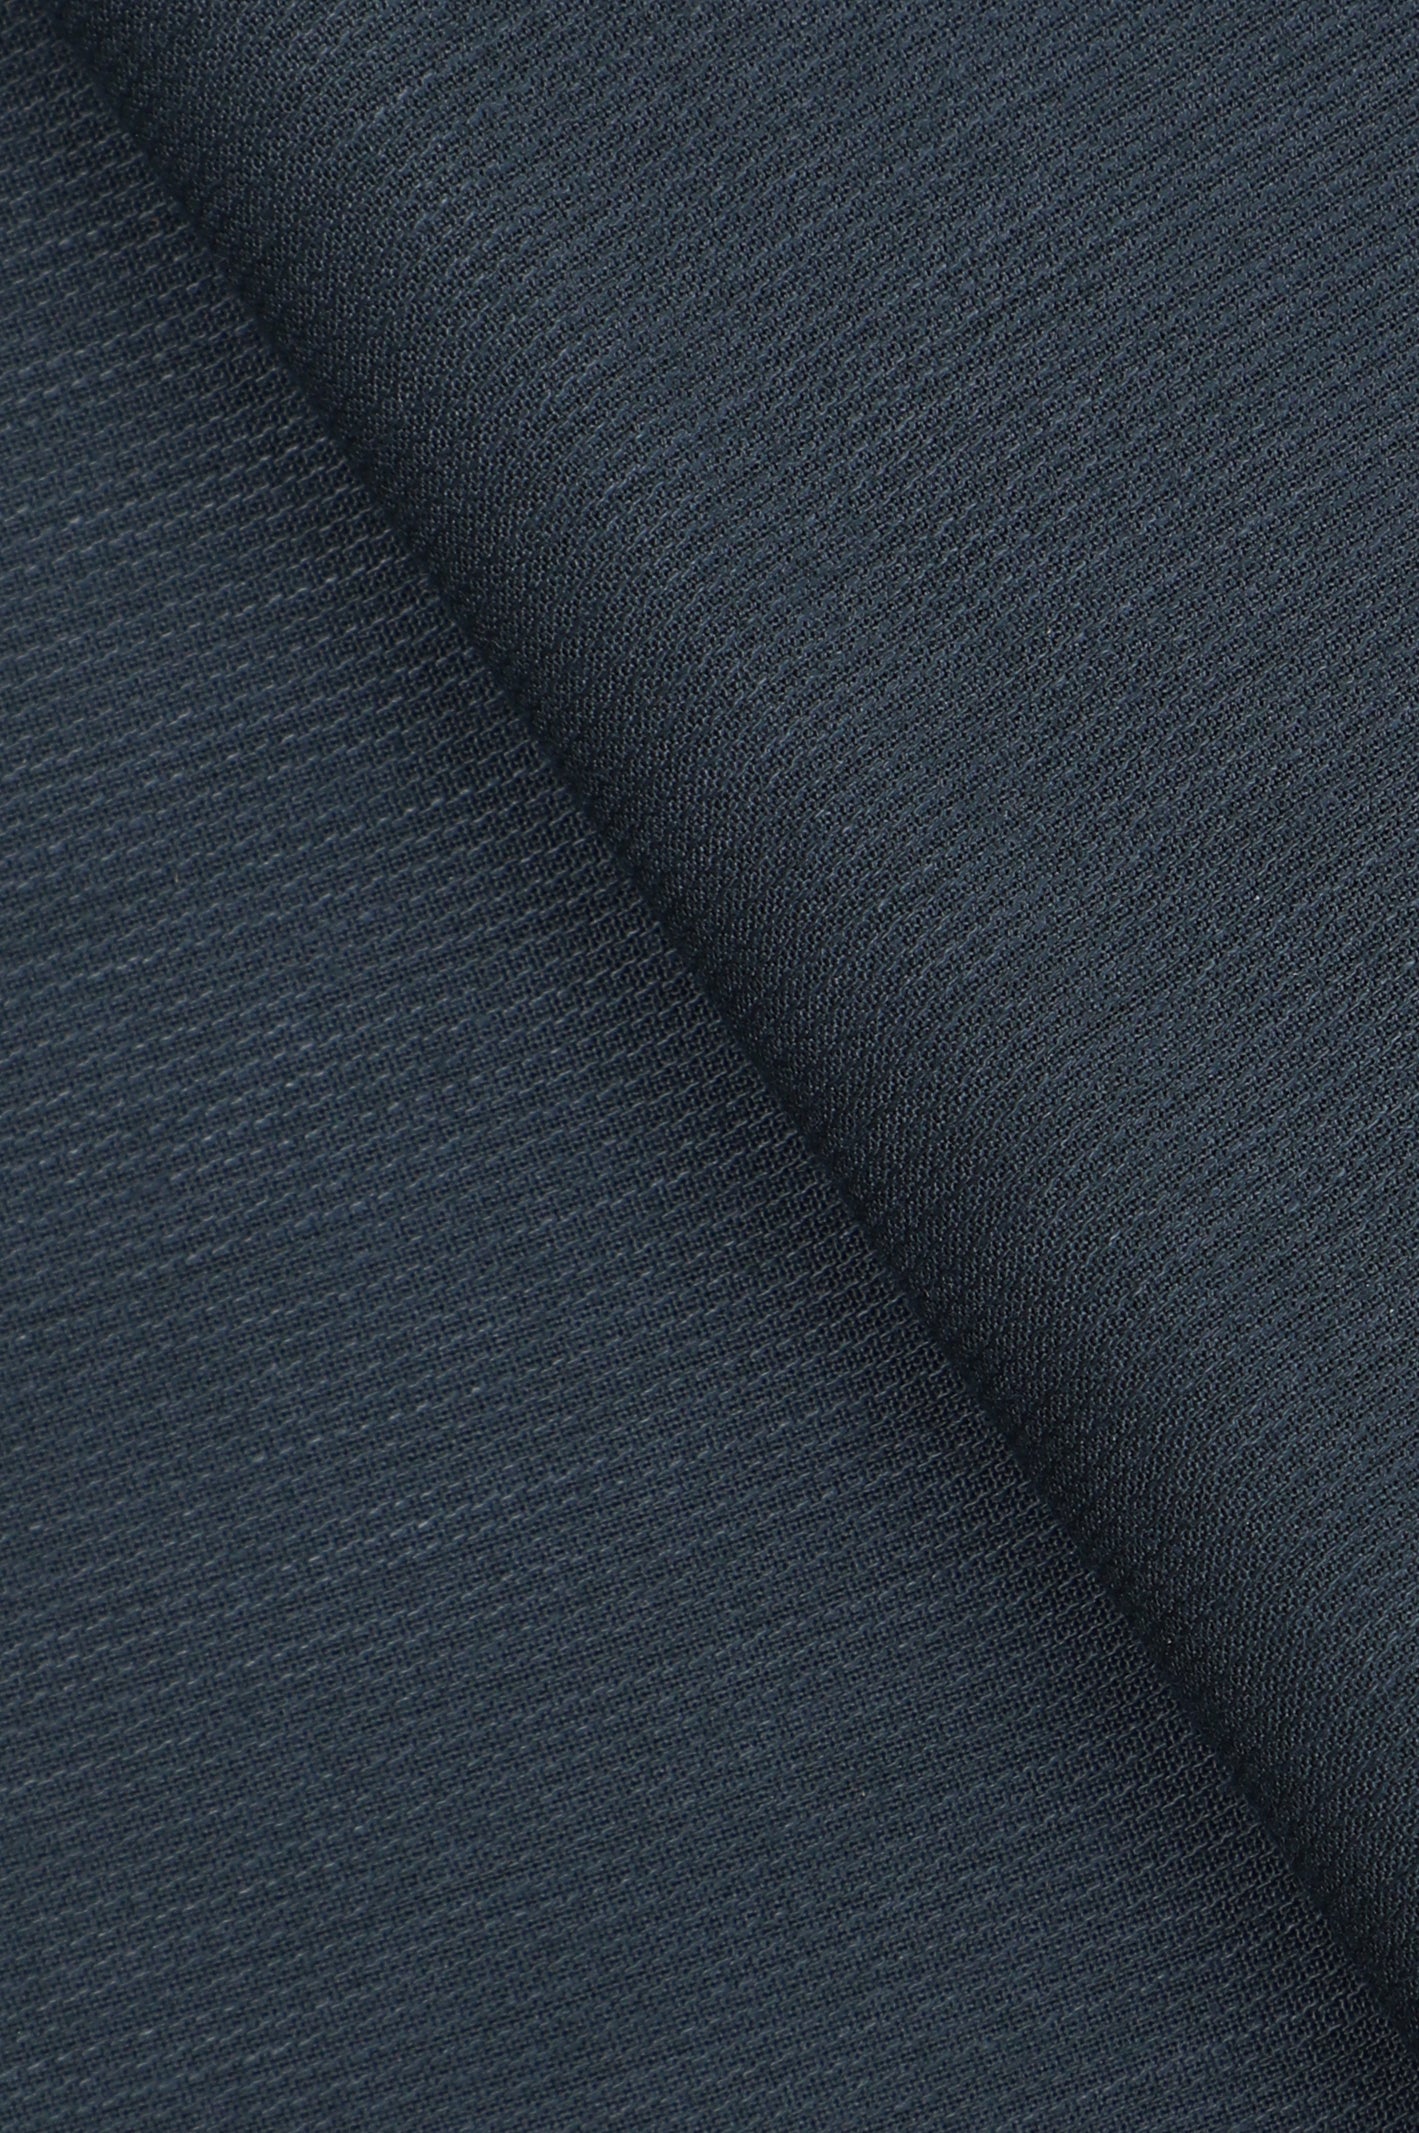 Unstitched Fabric for Men SKU: US0189-D-GREY - Diners